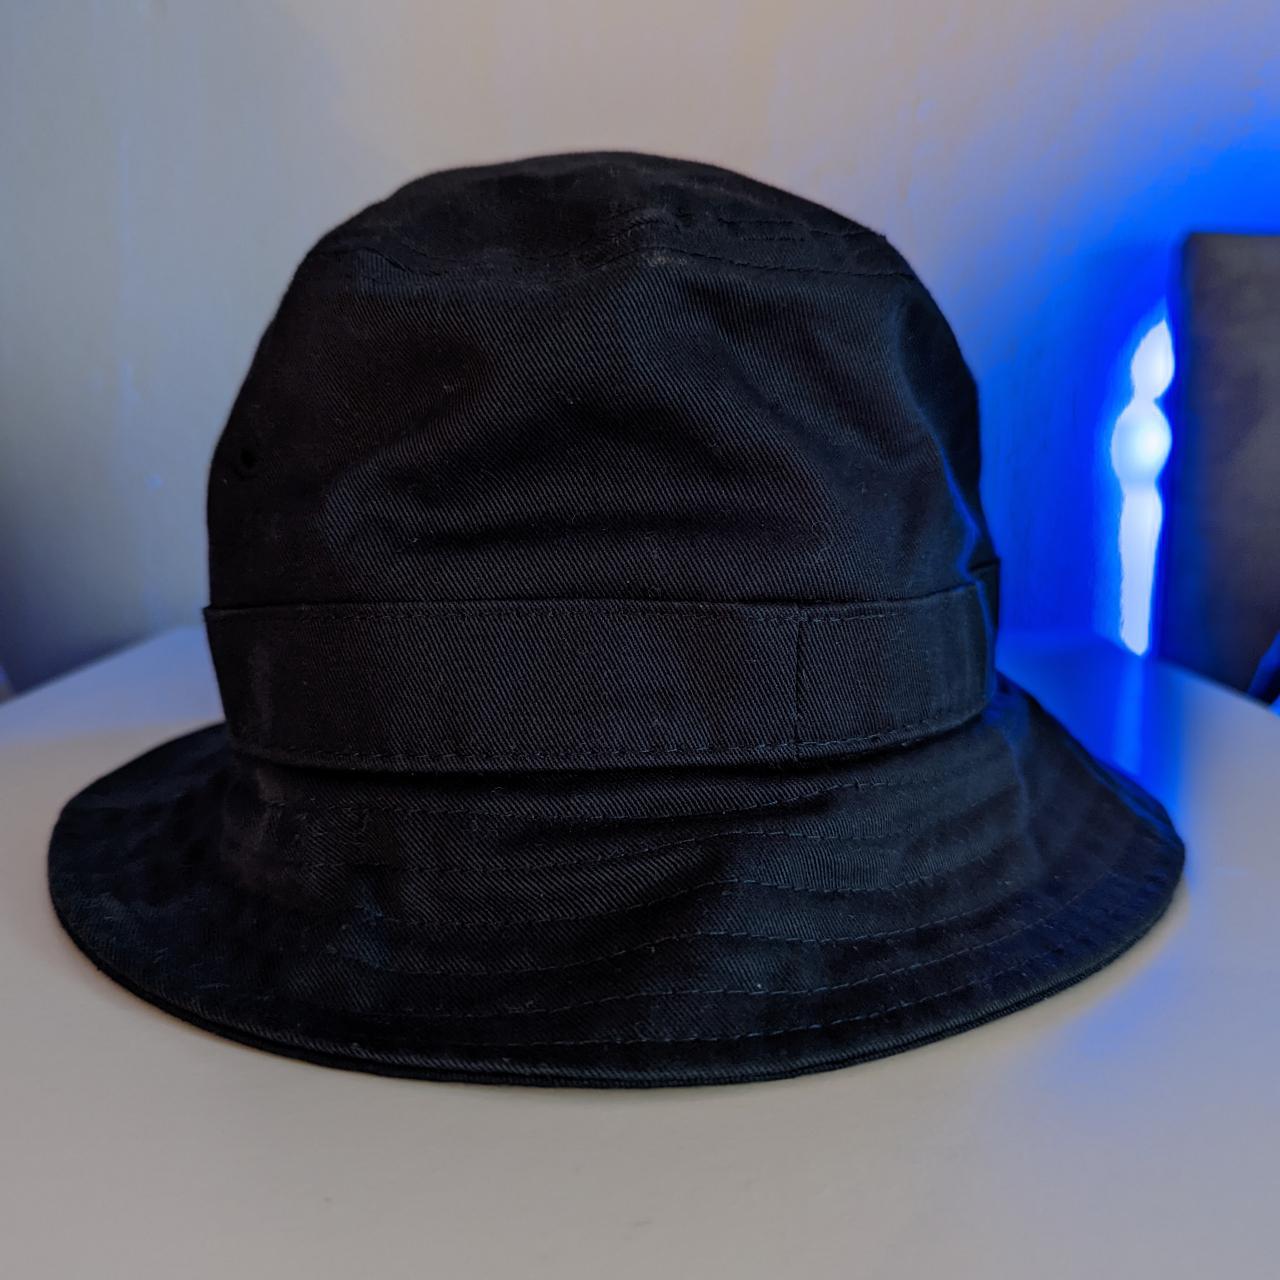 Product Image 2 - Mitchell and Ness bucket hat,